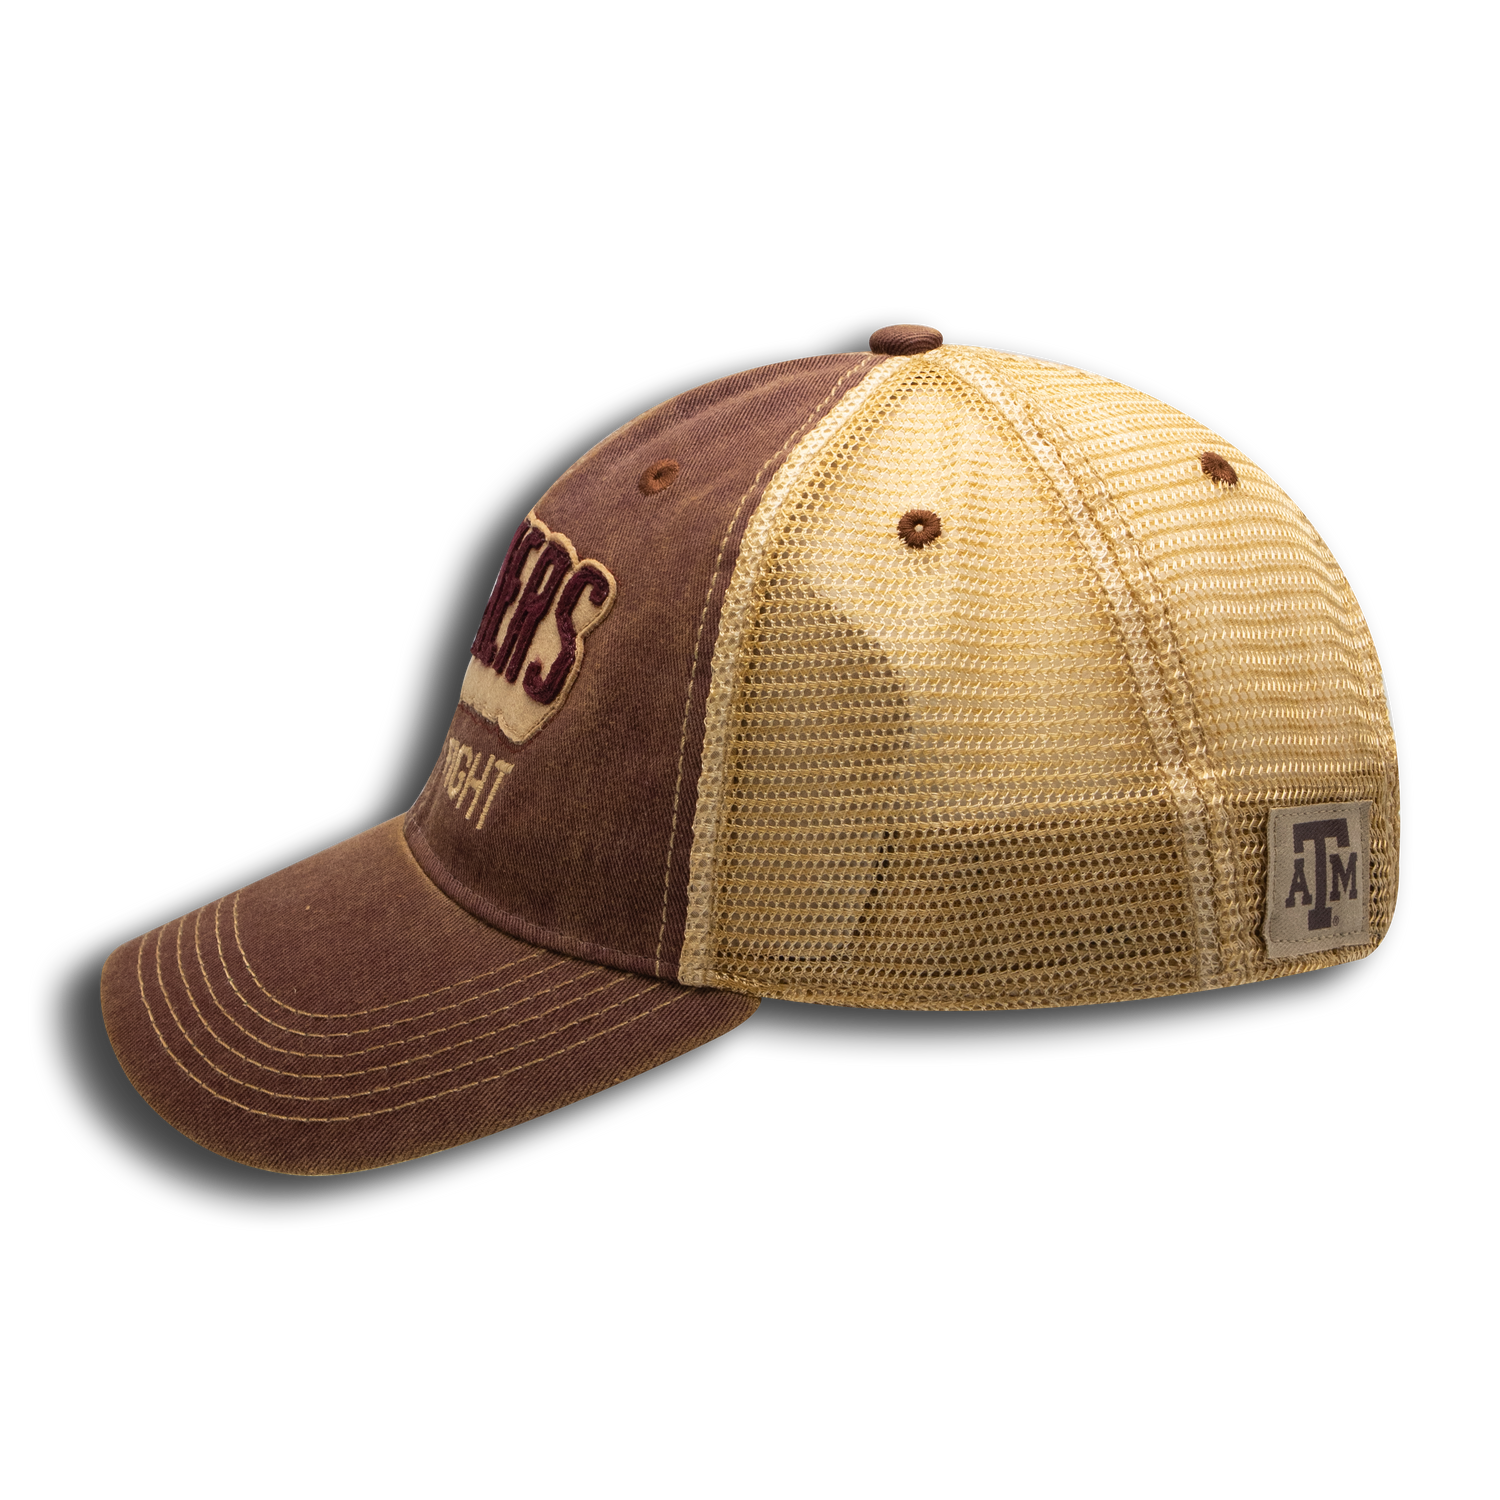 Texas A&M Old Favorite Farmers Fight Hat